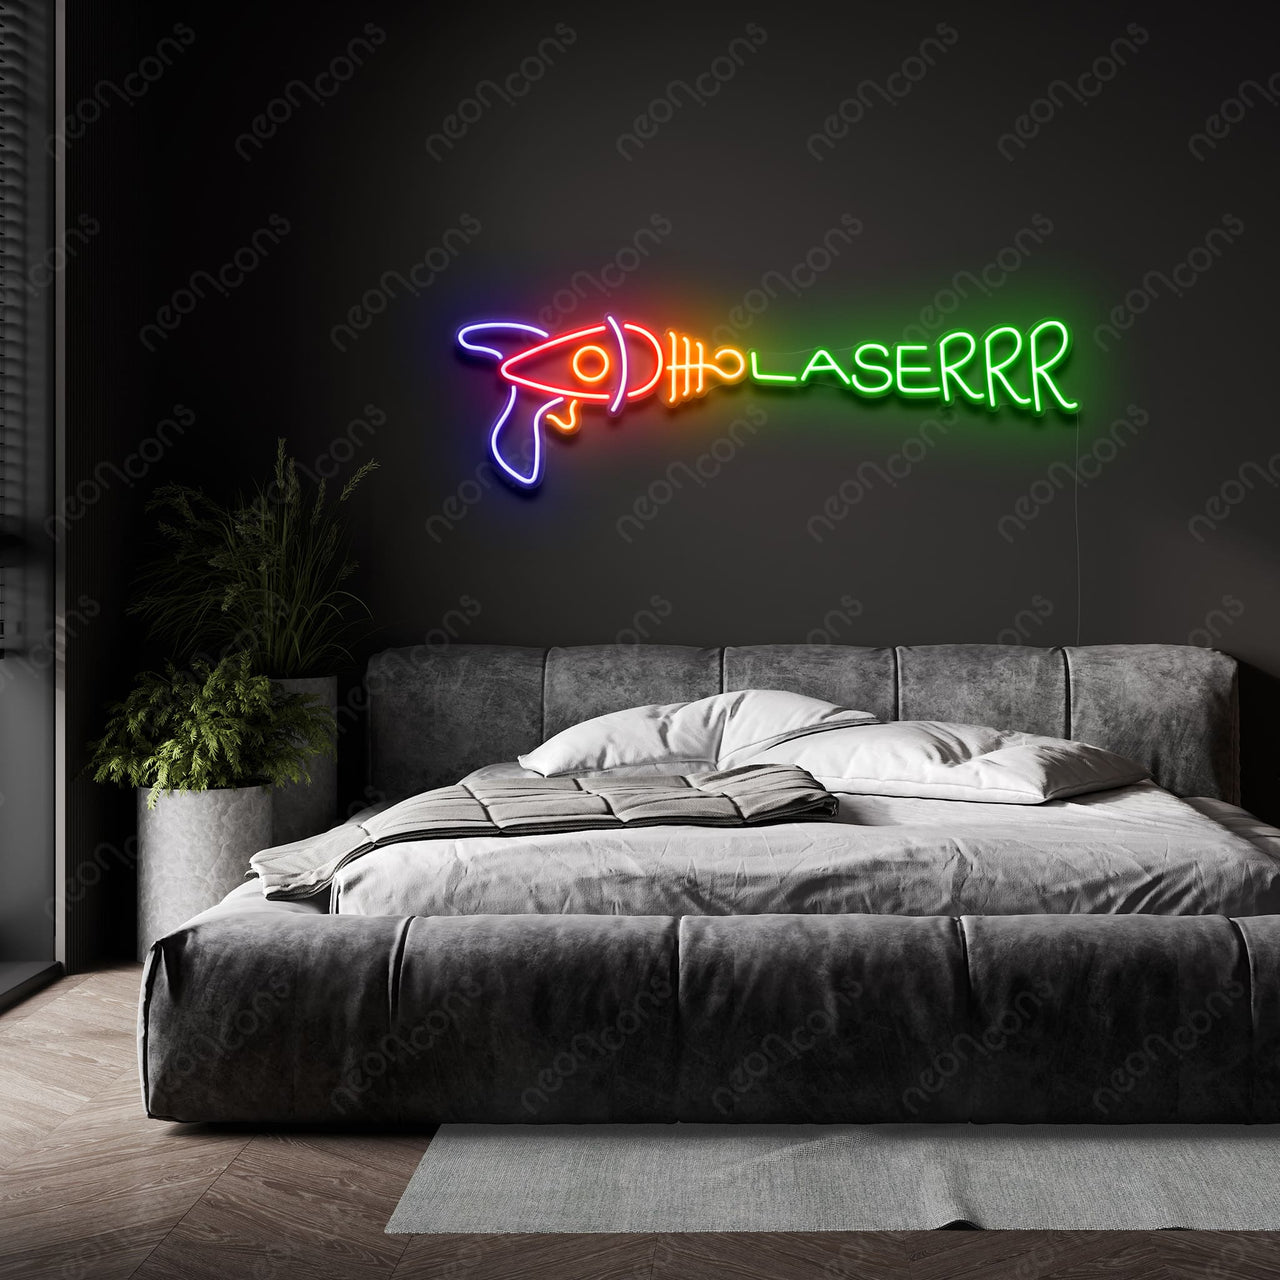 "Laserrr" Neon Sign by Neon Icons